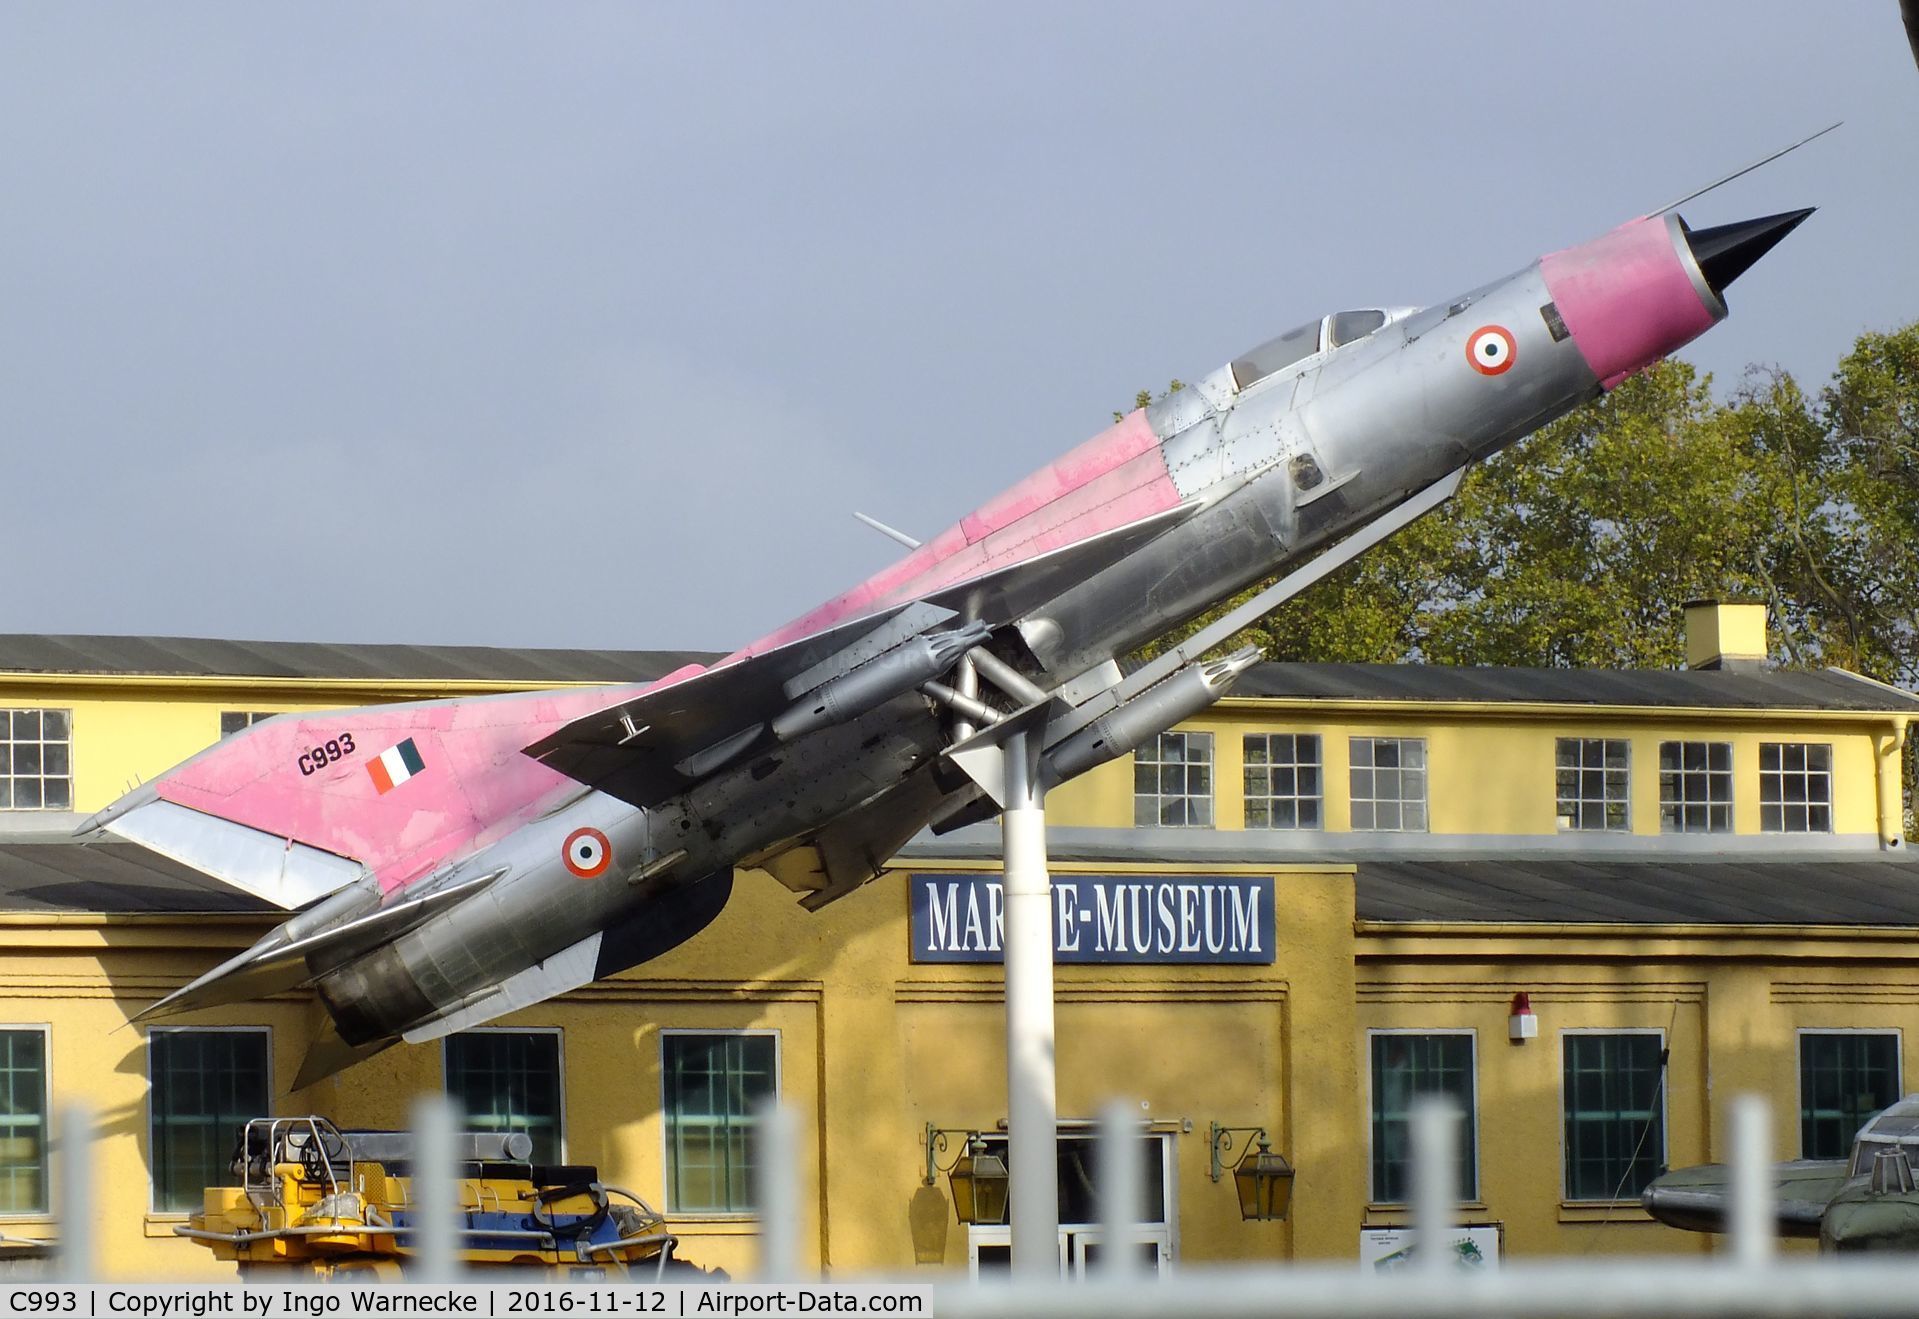 C993, 1966 Mikoyan-Gurevich MiG-21SPS C/N 94A4301, Mikoyan i Gurevich MiG-21SPS FISHBED-F at the Technik-Museum, Speyer